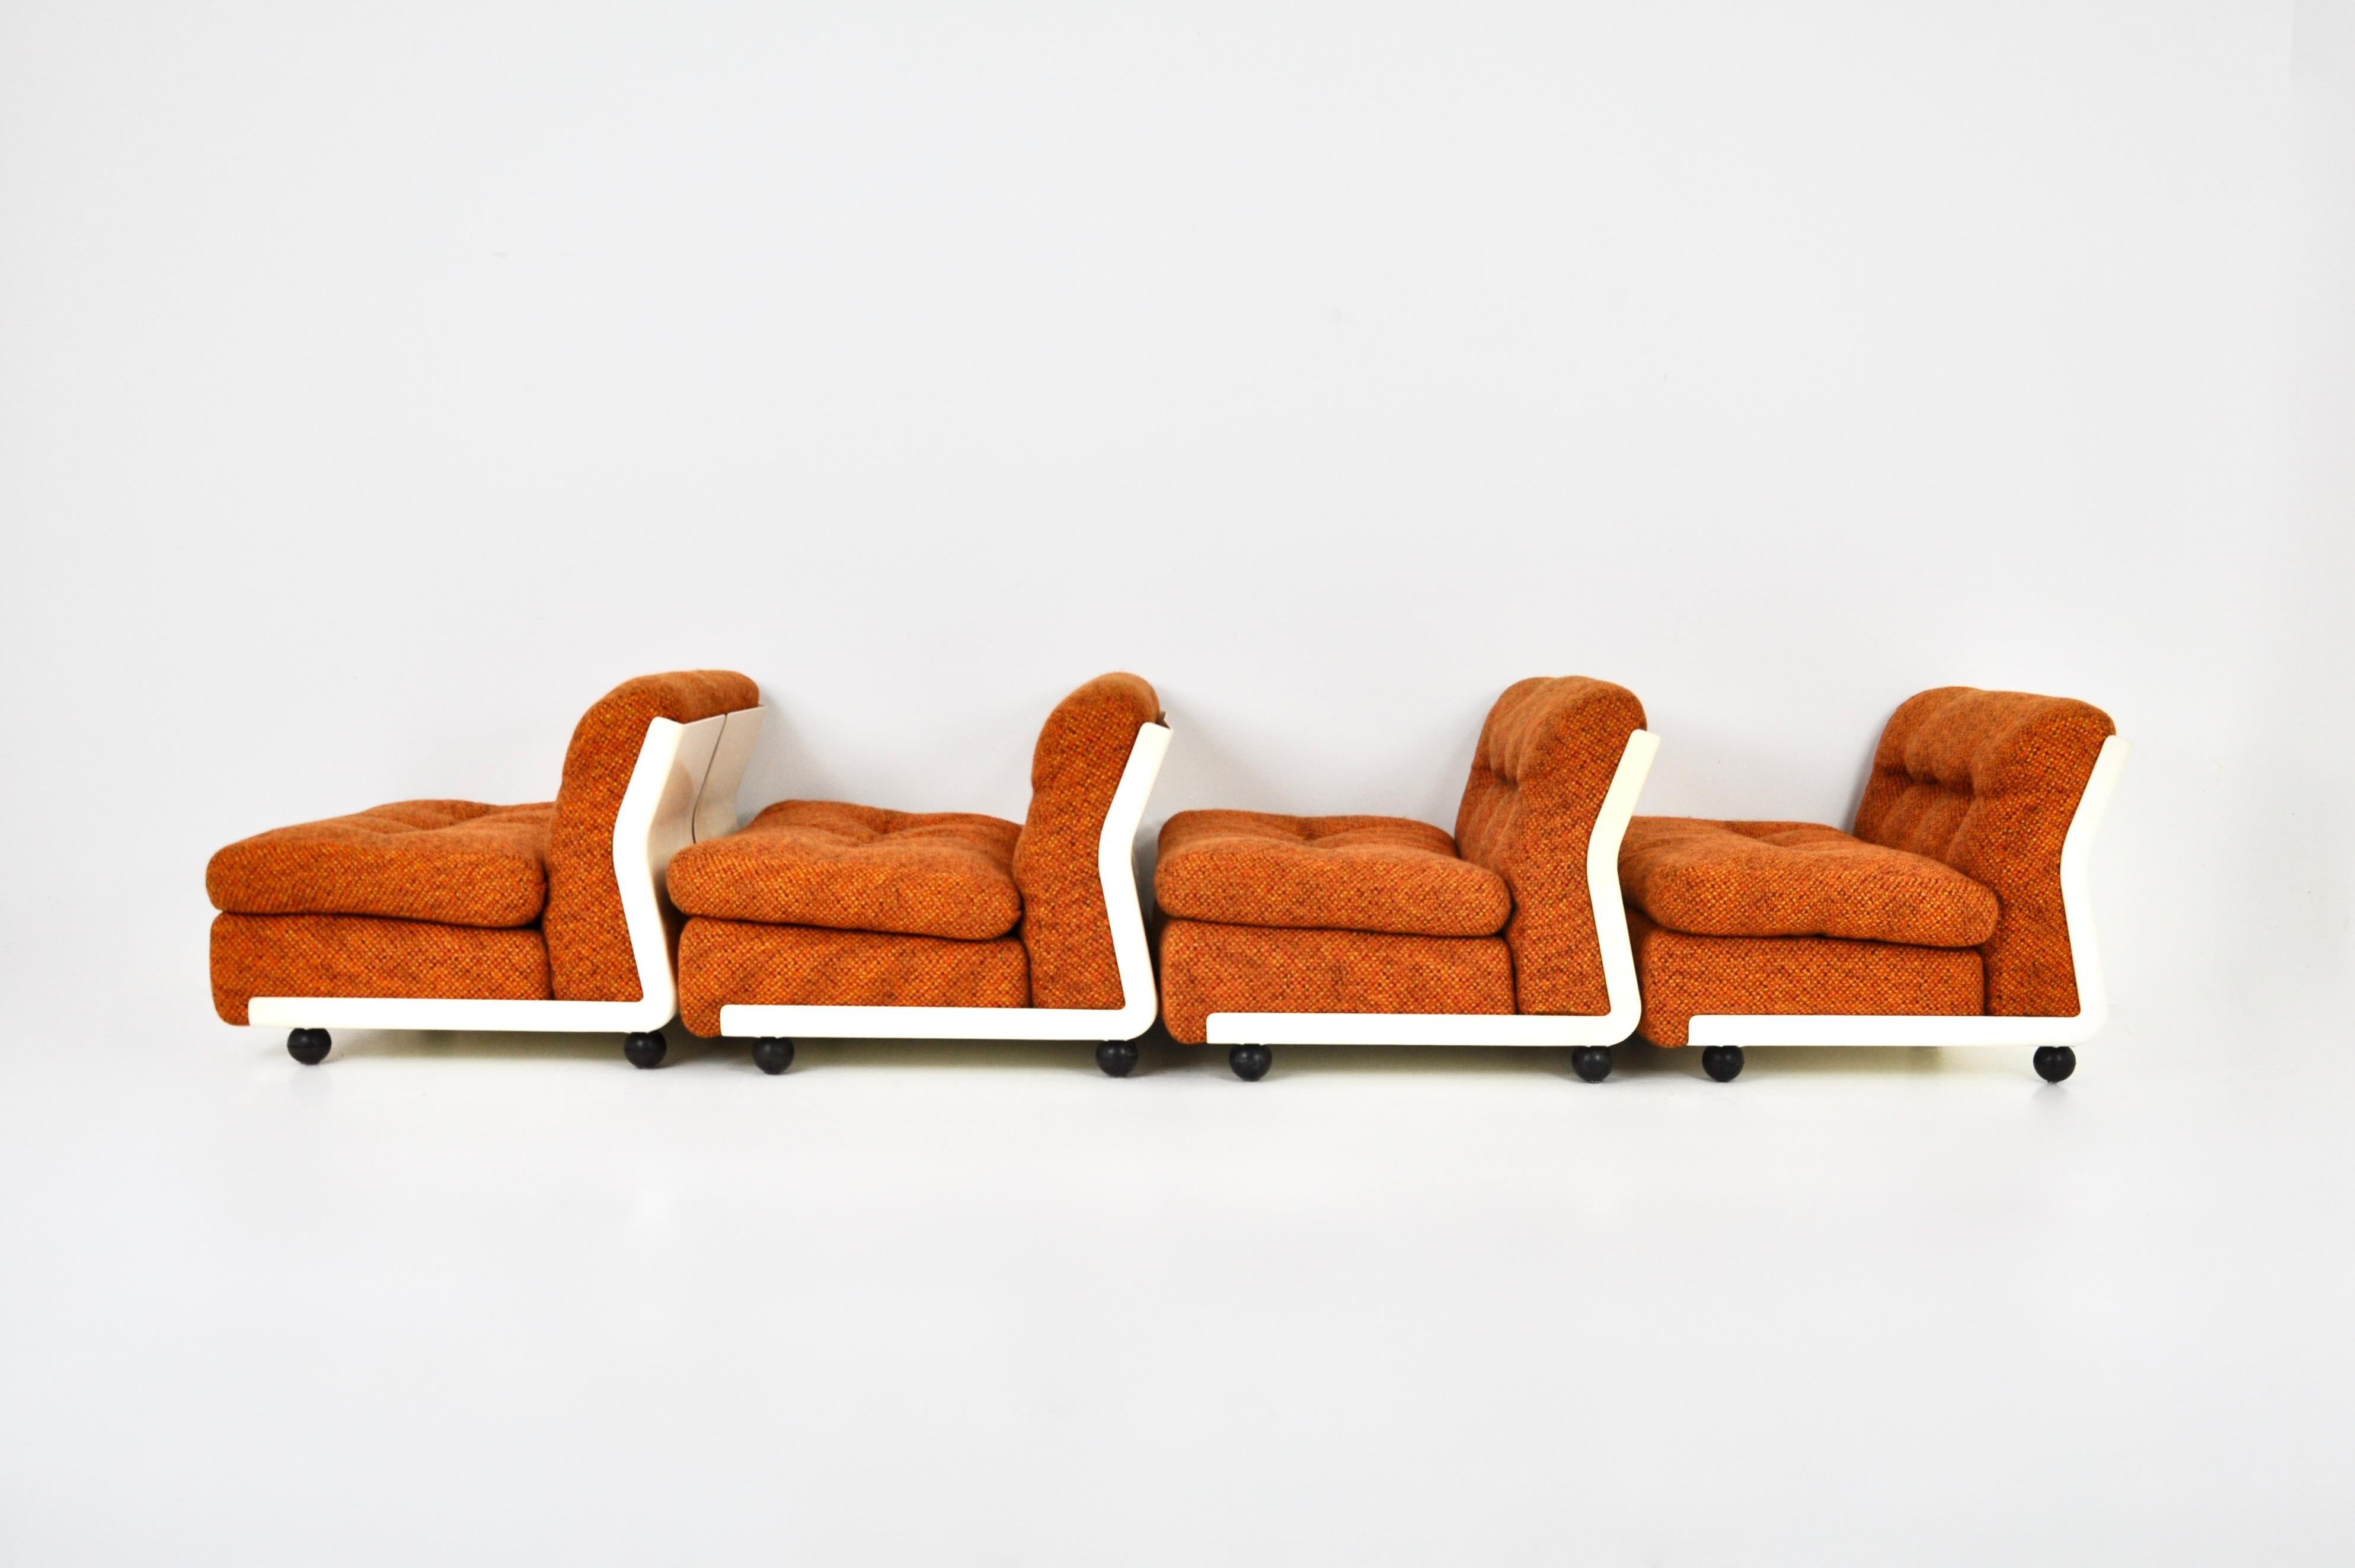 Amanta Lounge chairs by Mario Bellini for C&B Italia, 1960s, set of 4 For Sale 2